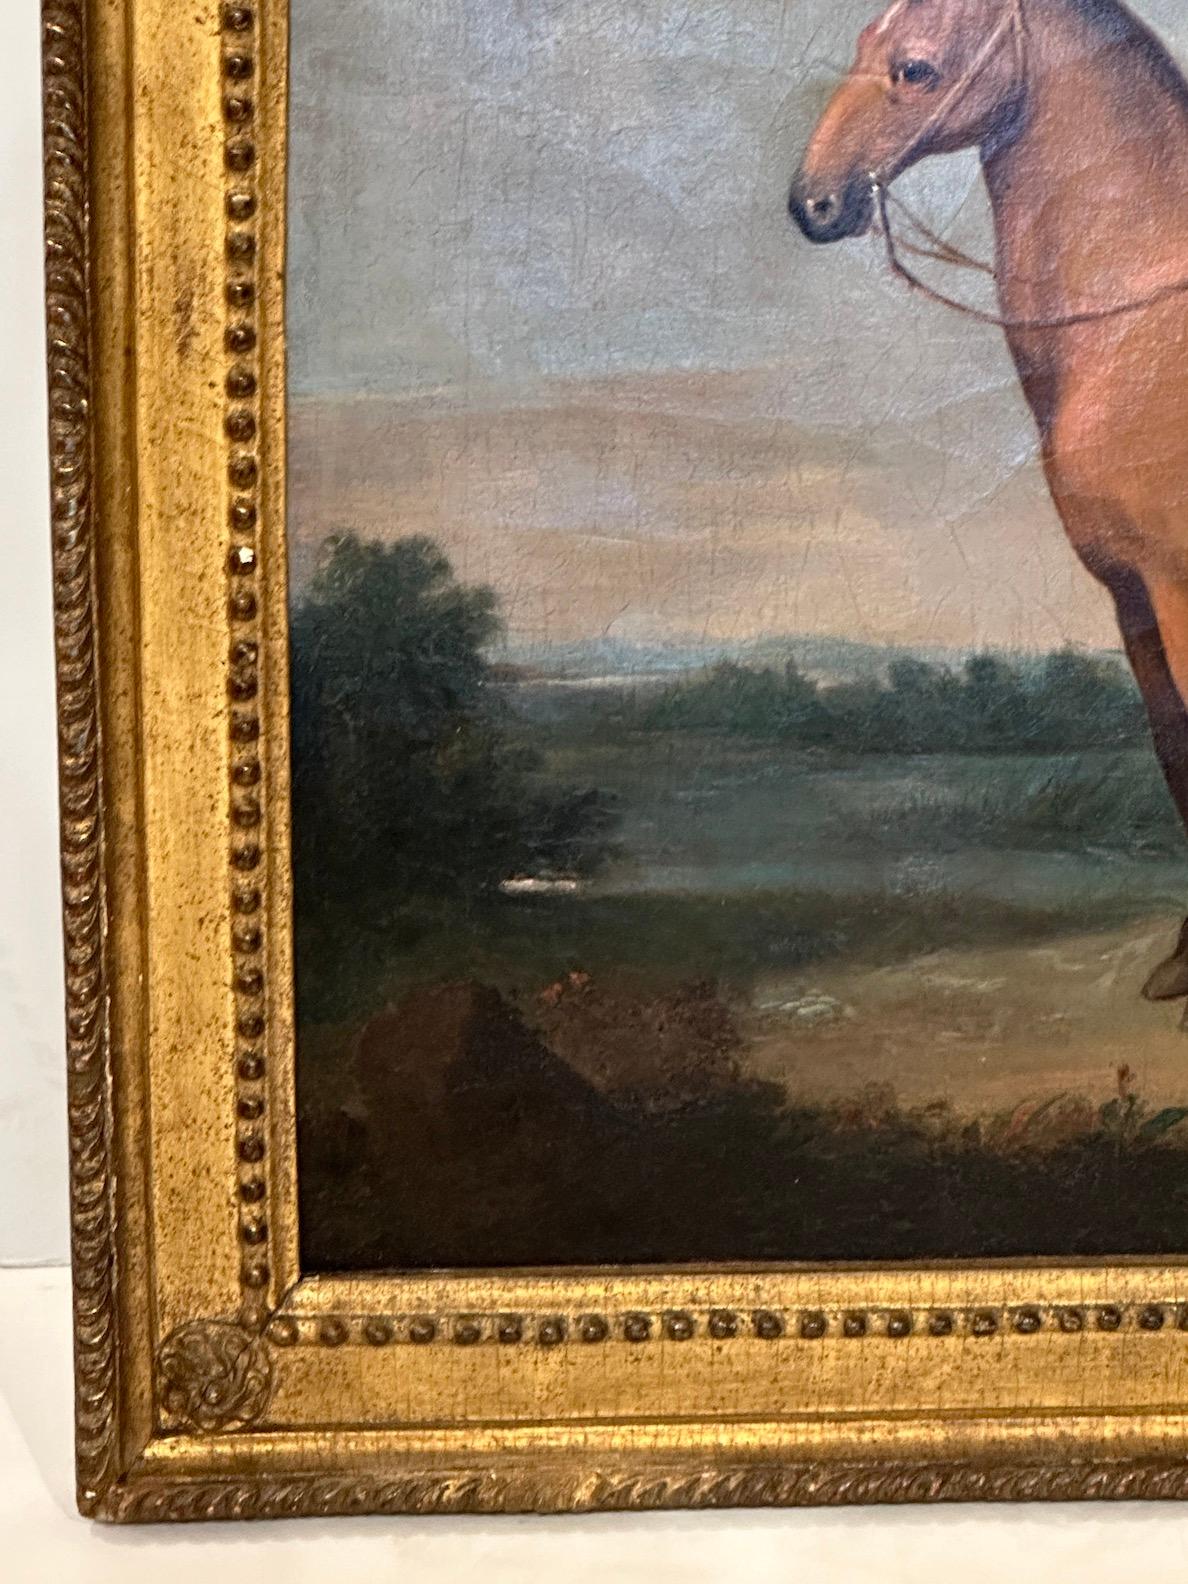 Charming oil on canvas of a horse surrounded by lush landscape in a period frame.